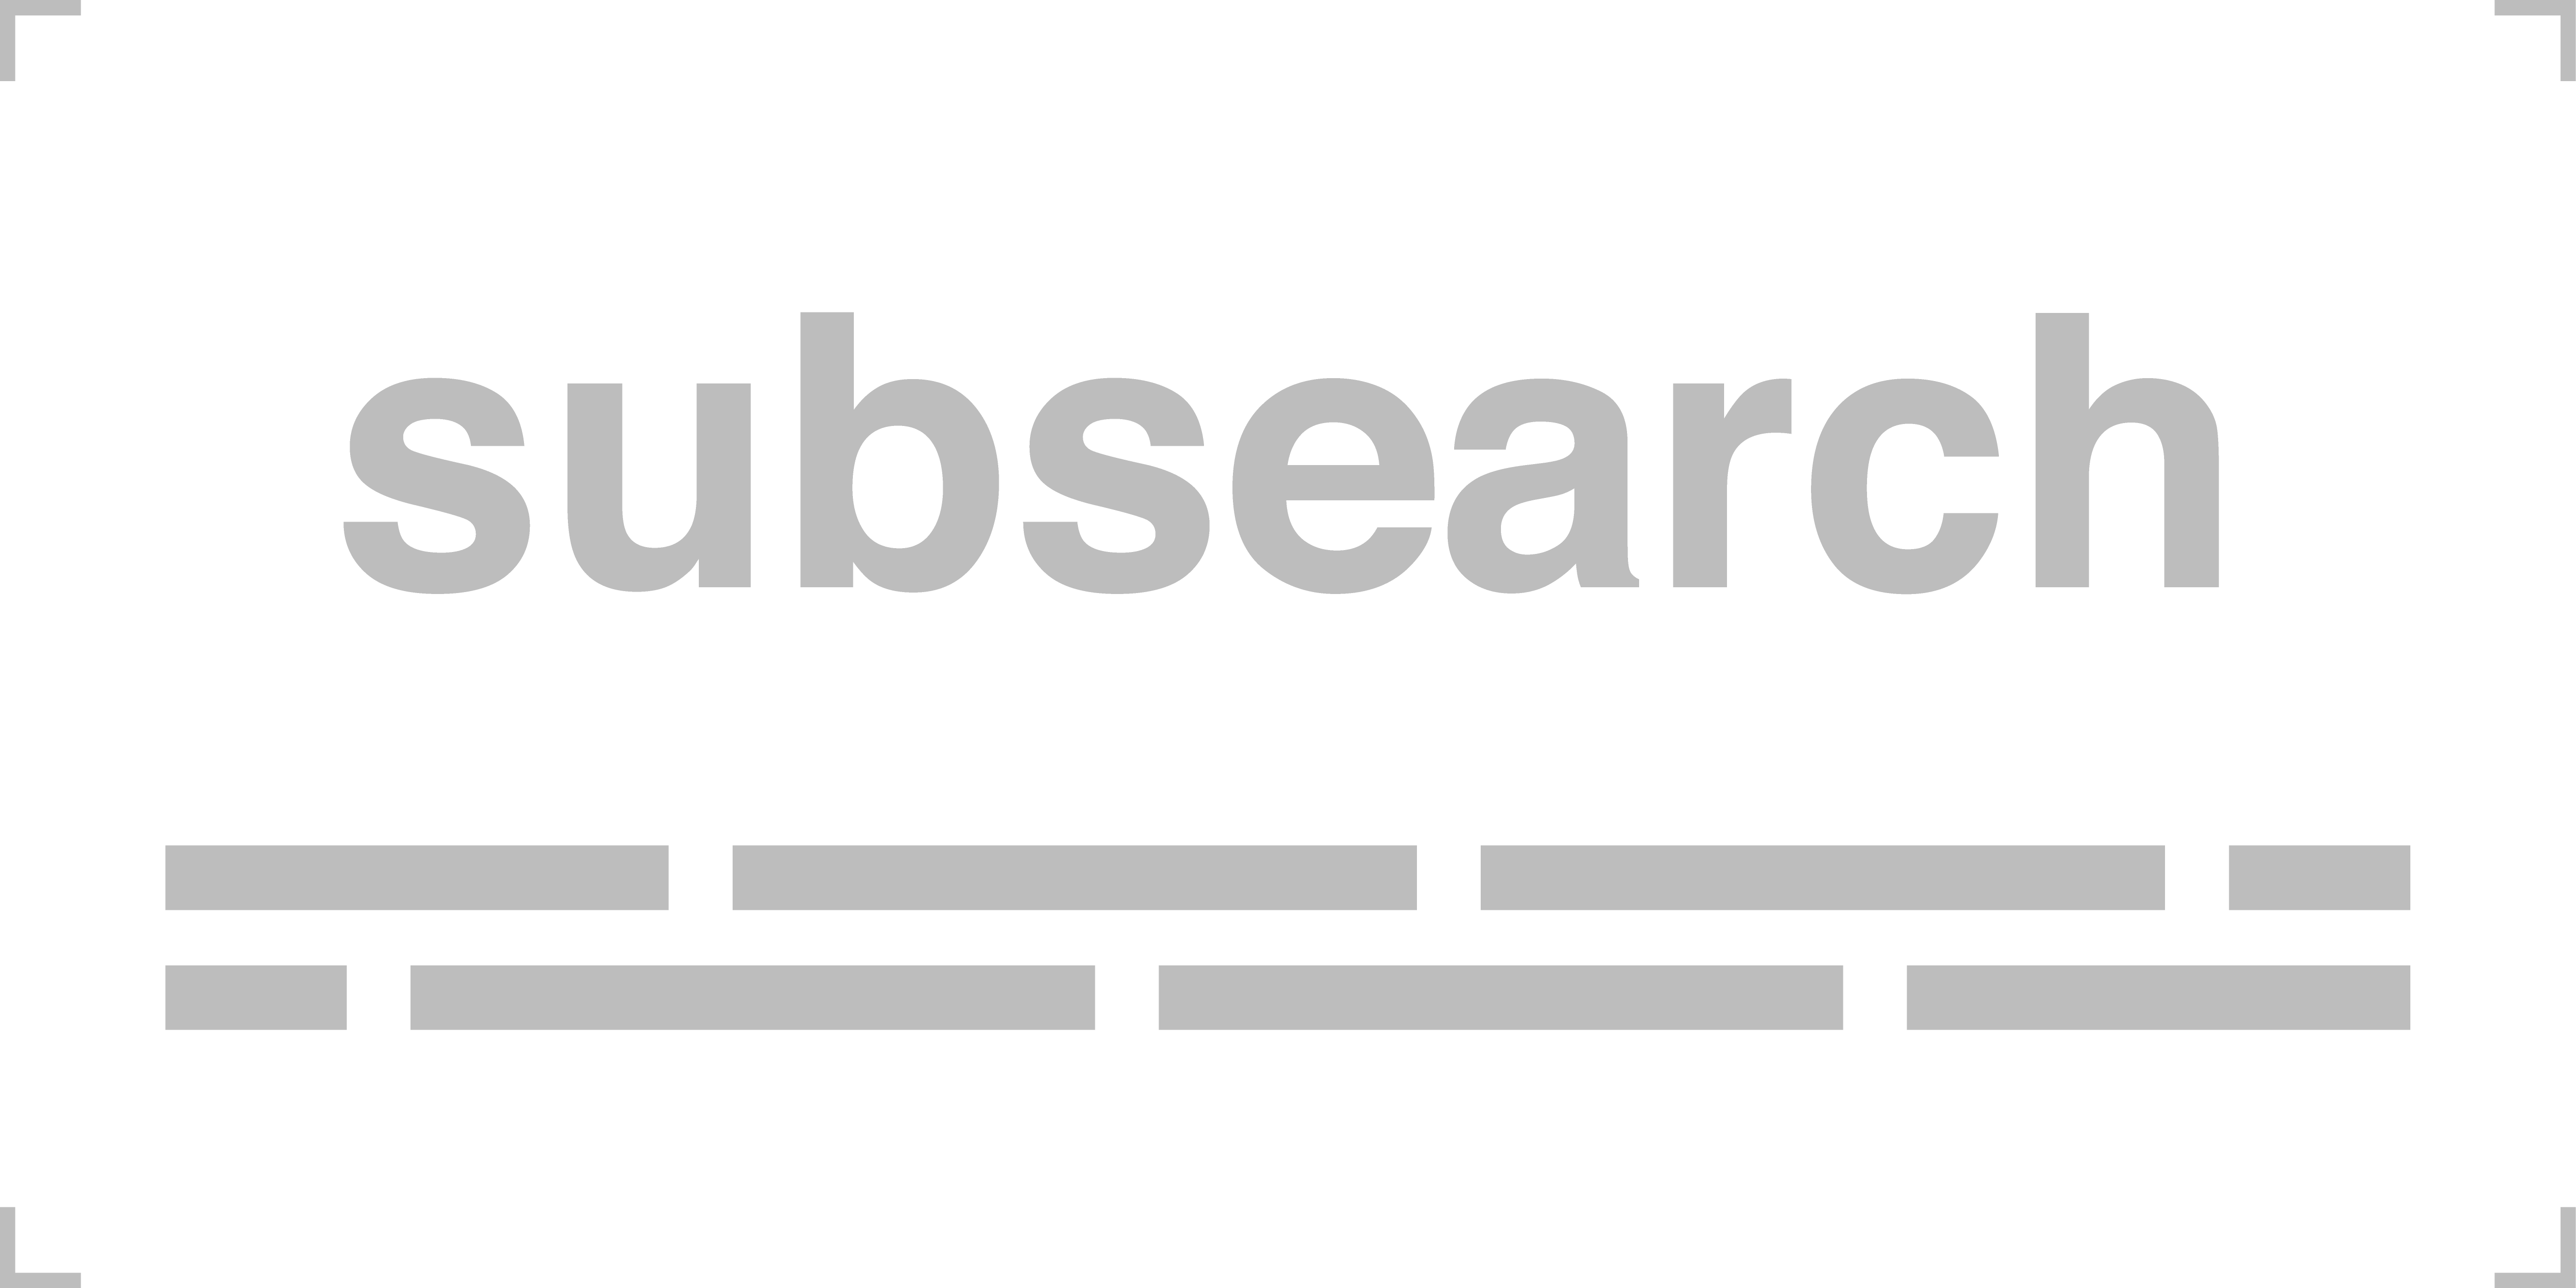 subsearch